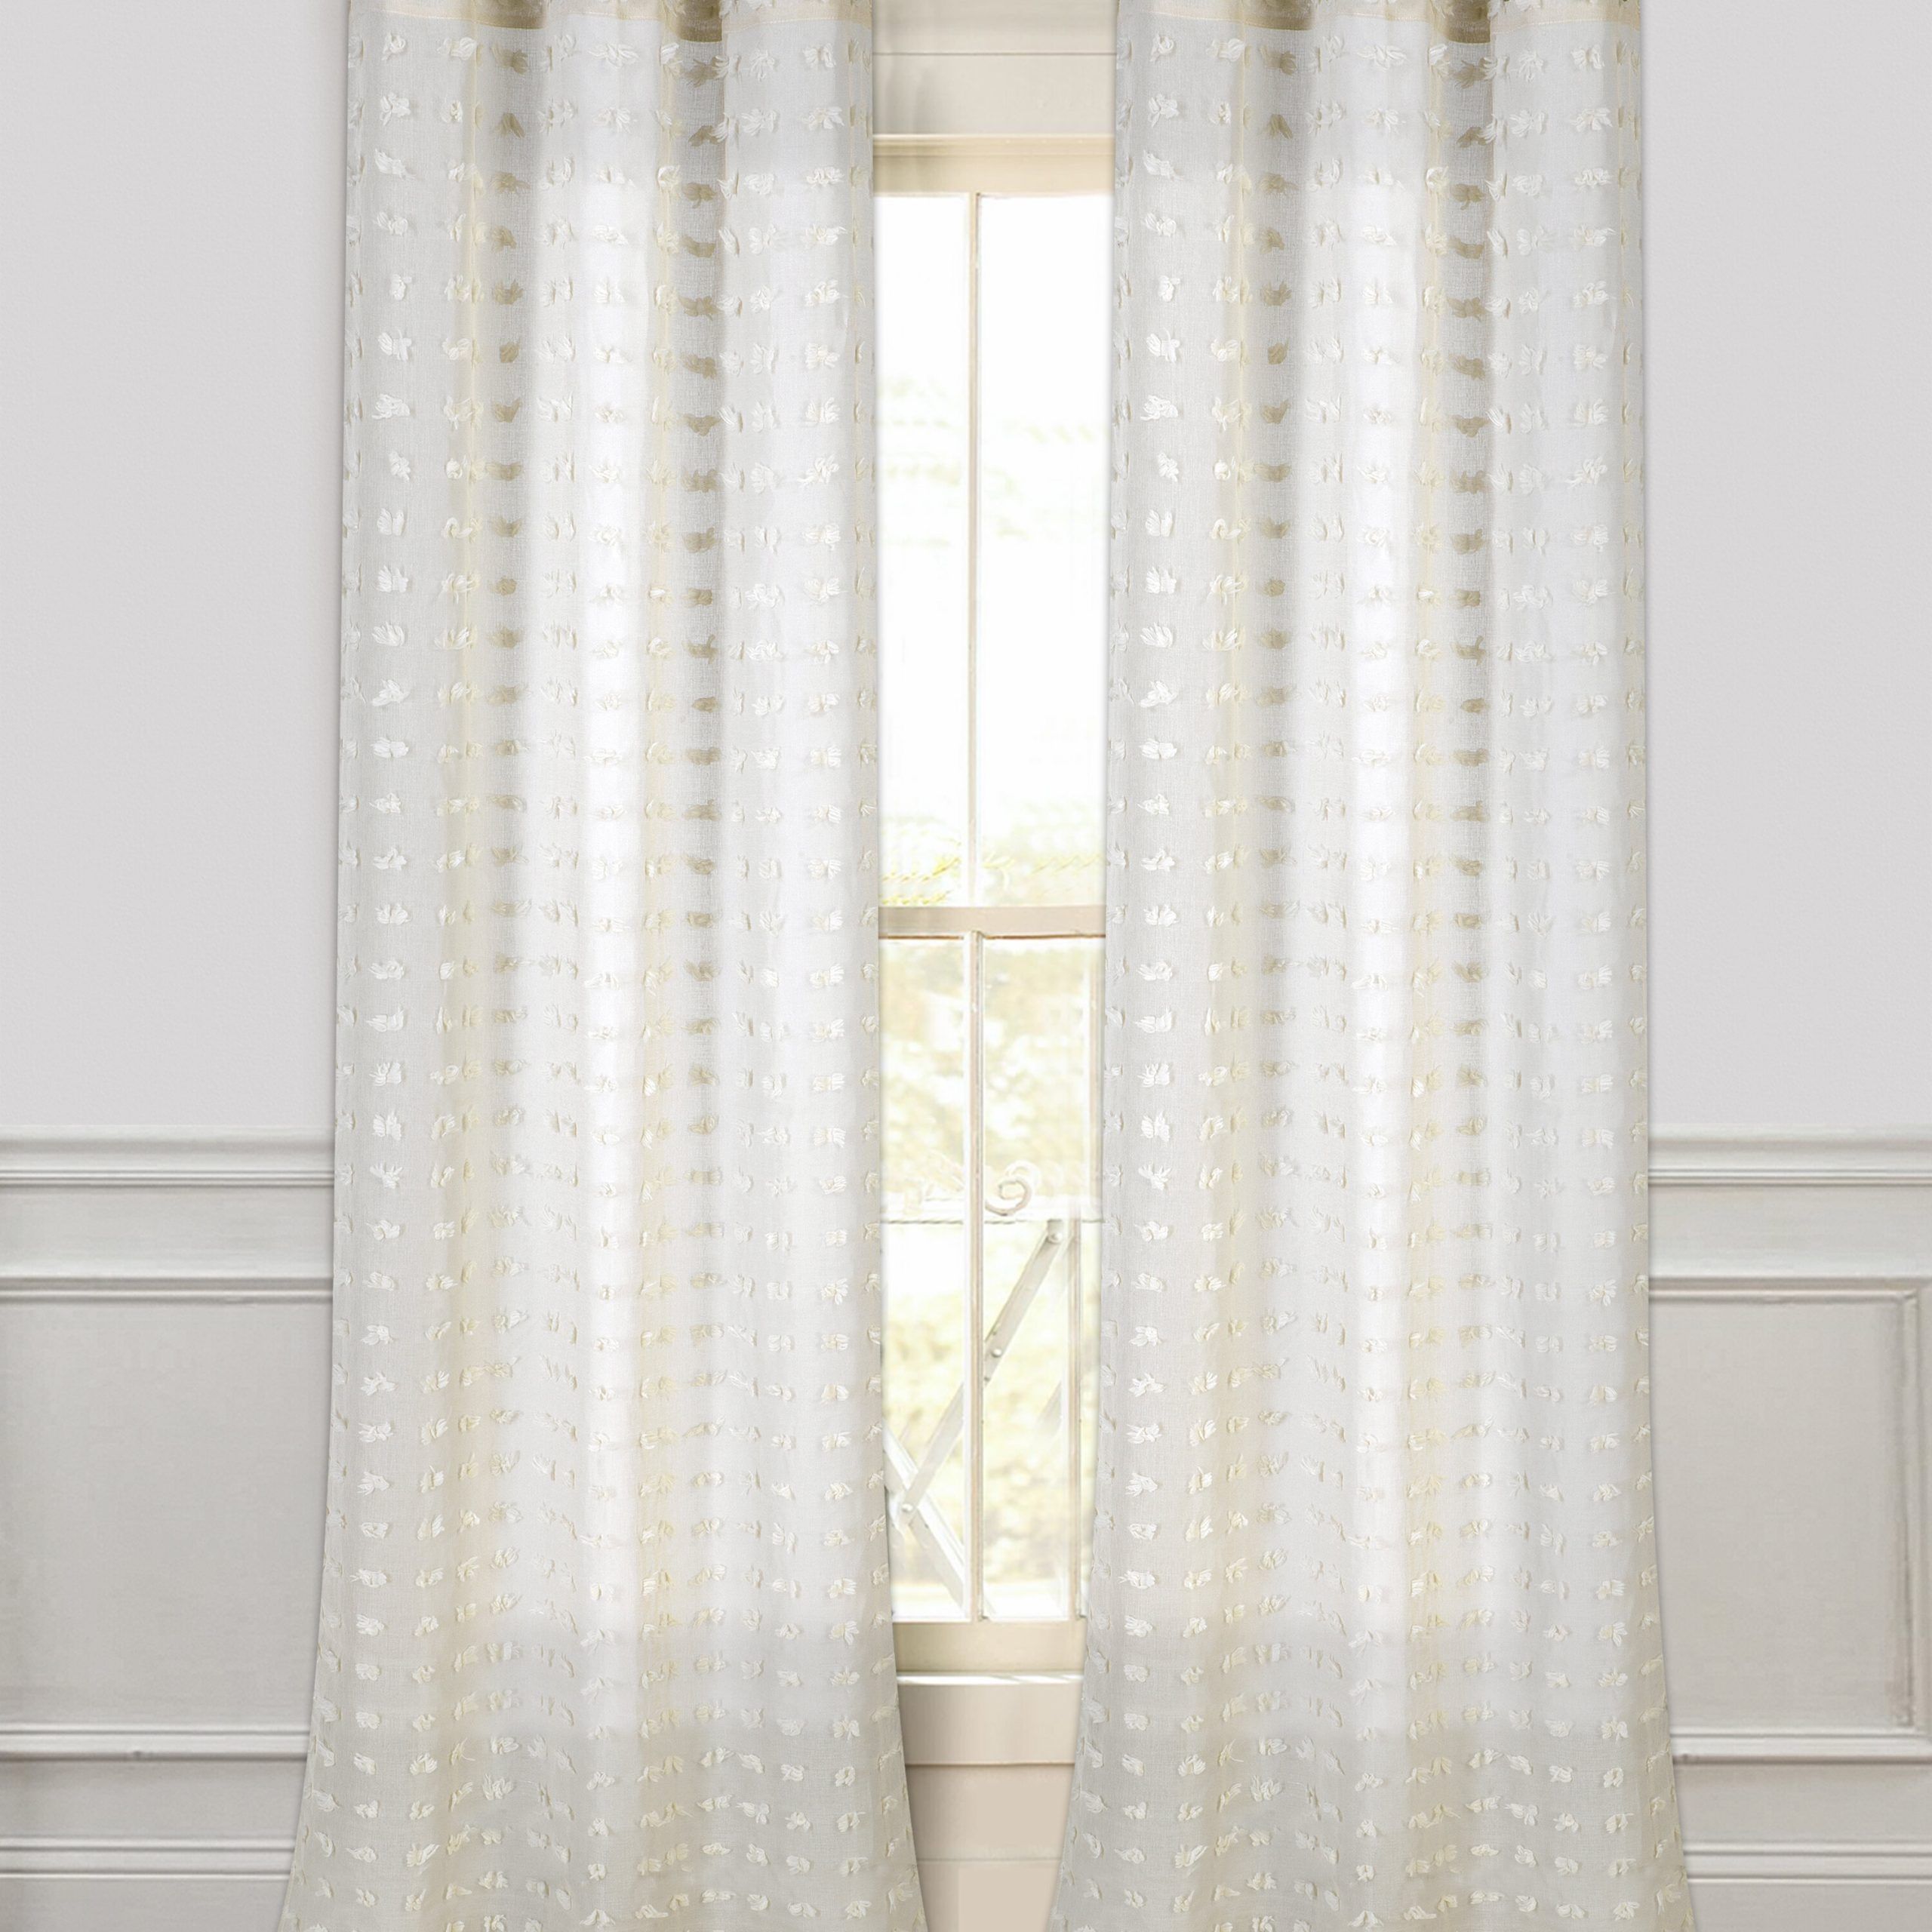 Arielle Solid Semi Sheer Grommet Curtain Panels With White Micro Striped Semi Sheer Window Curtain Pieces (View 20 of 20)